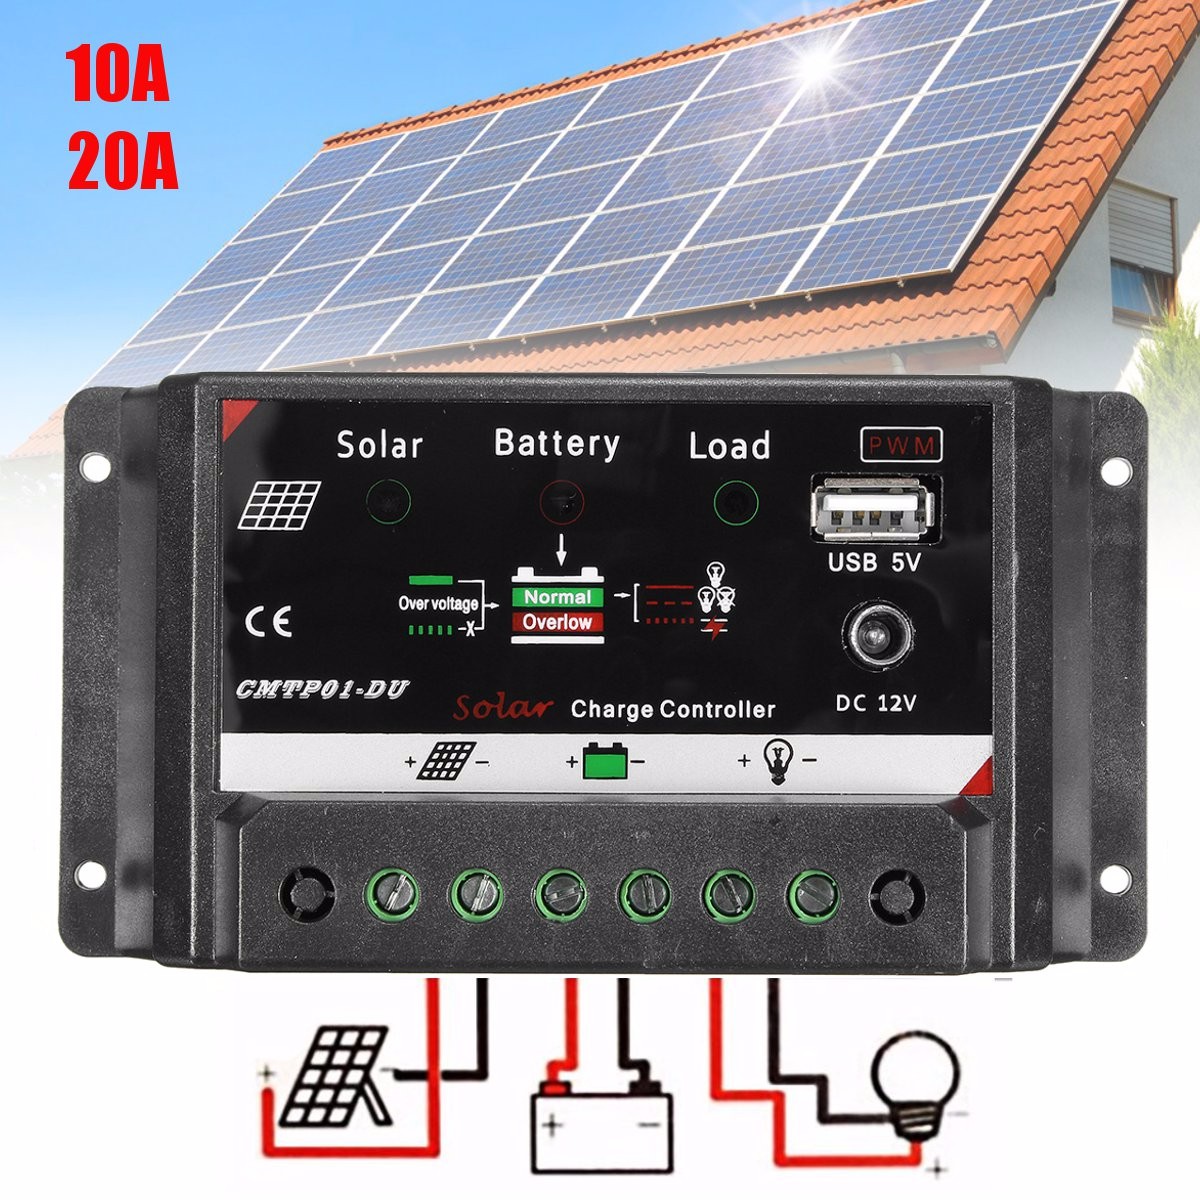 1020A-LED-Auto-PWM-Solar-Panel-Battery-Regulator-Charge-Controller-DC12V-Output-1089462-2